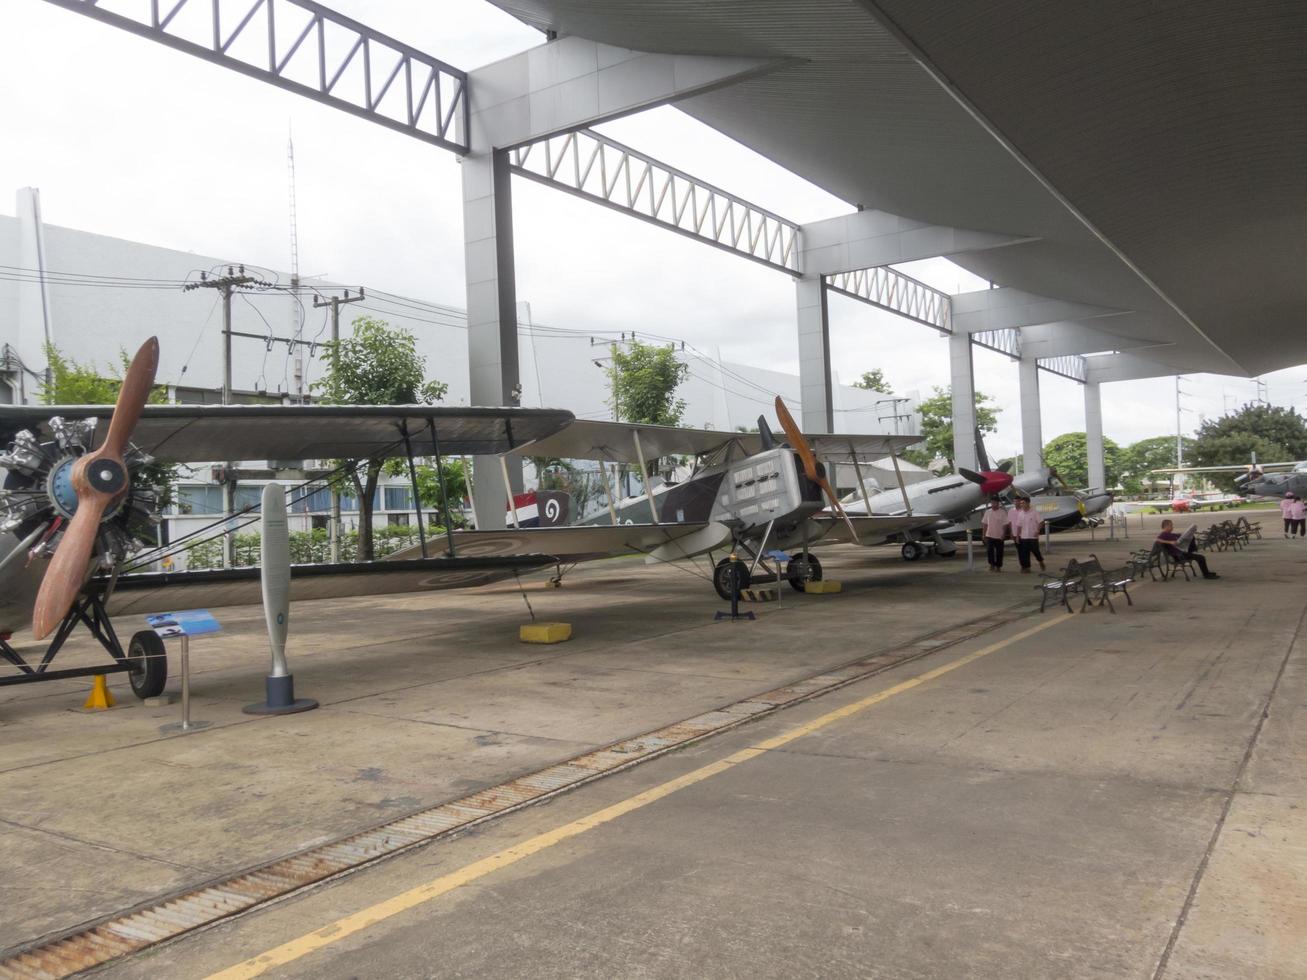 Royal Thai Air Force Museum BANGKOKTHAILAND18 AUGUST 2018 The exterior of the aircraft has many large aircraft. To learn more closely. on18 AUGUST 2018 in Thailand. photo